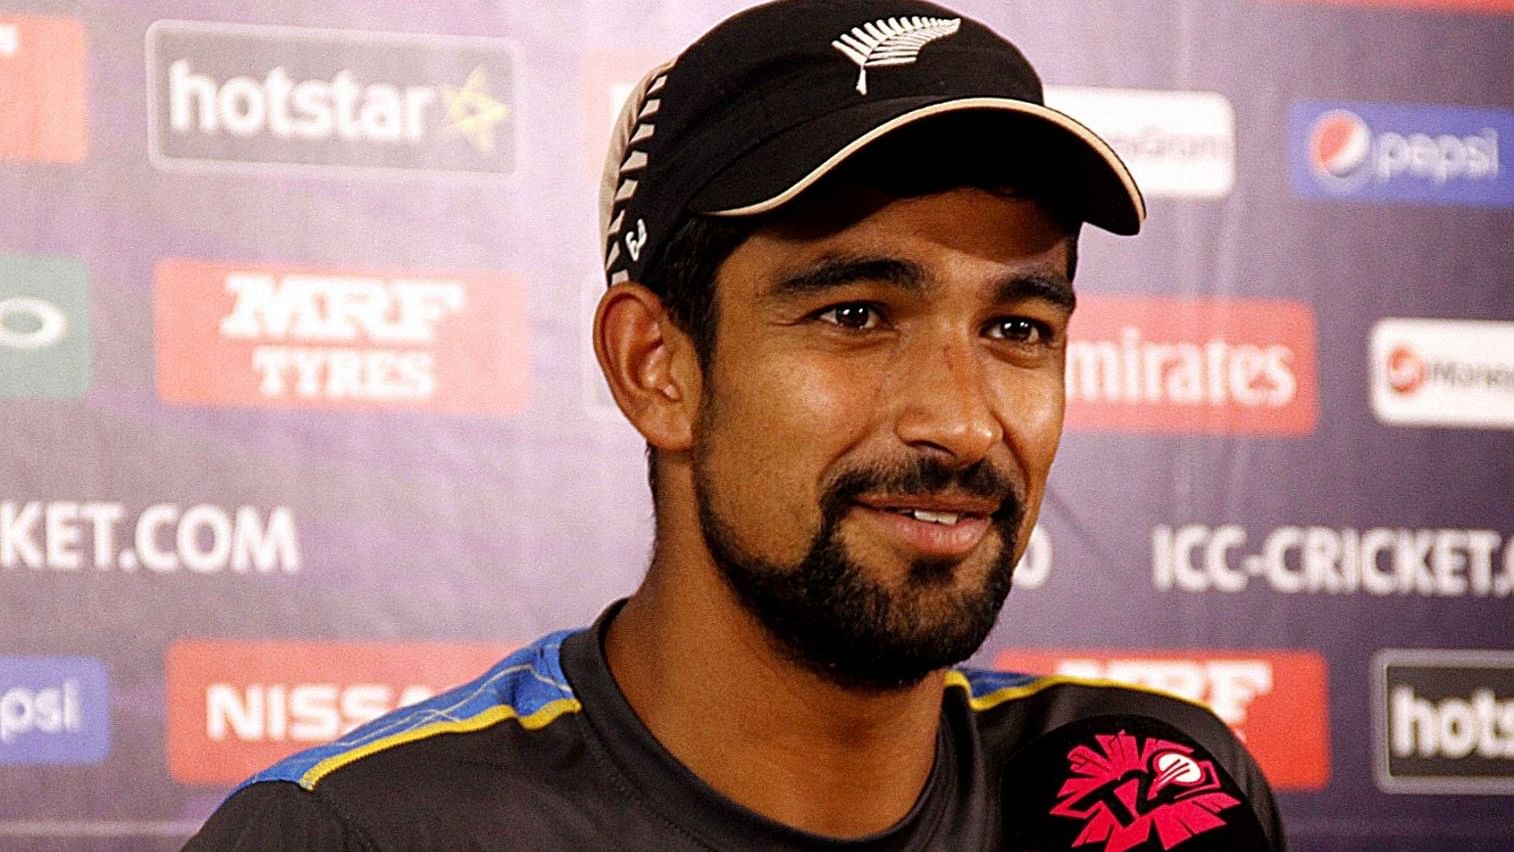 Leg-spinner Ish Sodhi believes New Zealand need to be more aggressive with the ball against India’s world class batting unit during the second T20I to make an immediate comeback in the five-match series.